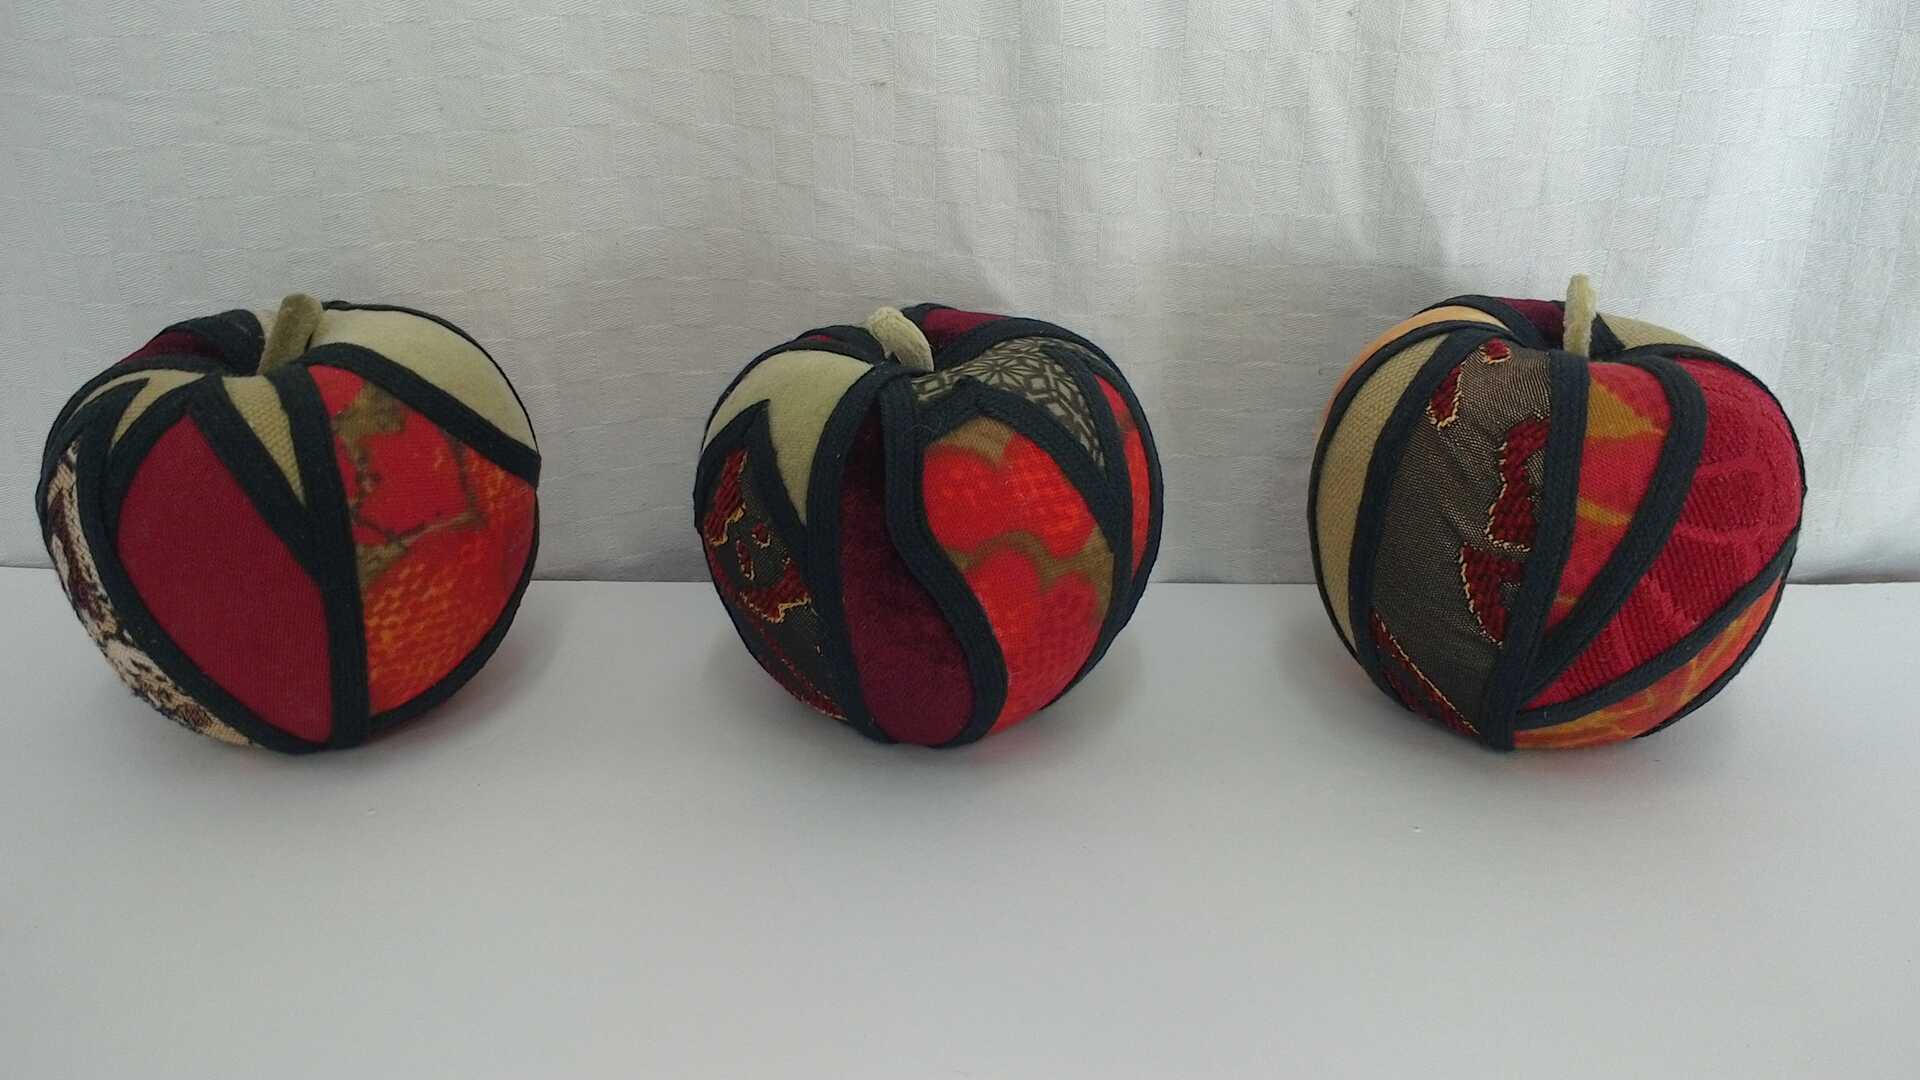 Sculpture 'Enough for Everyone I' by Libby Bloxham. Three Apples are covered in swatches of fabric in shades of olive green and red. The fabric covering is segmented into irregular panels with thick black binding, complimenting the contours of the shape.